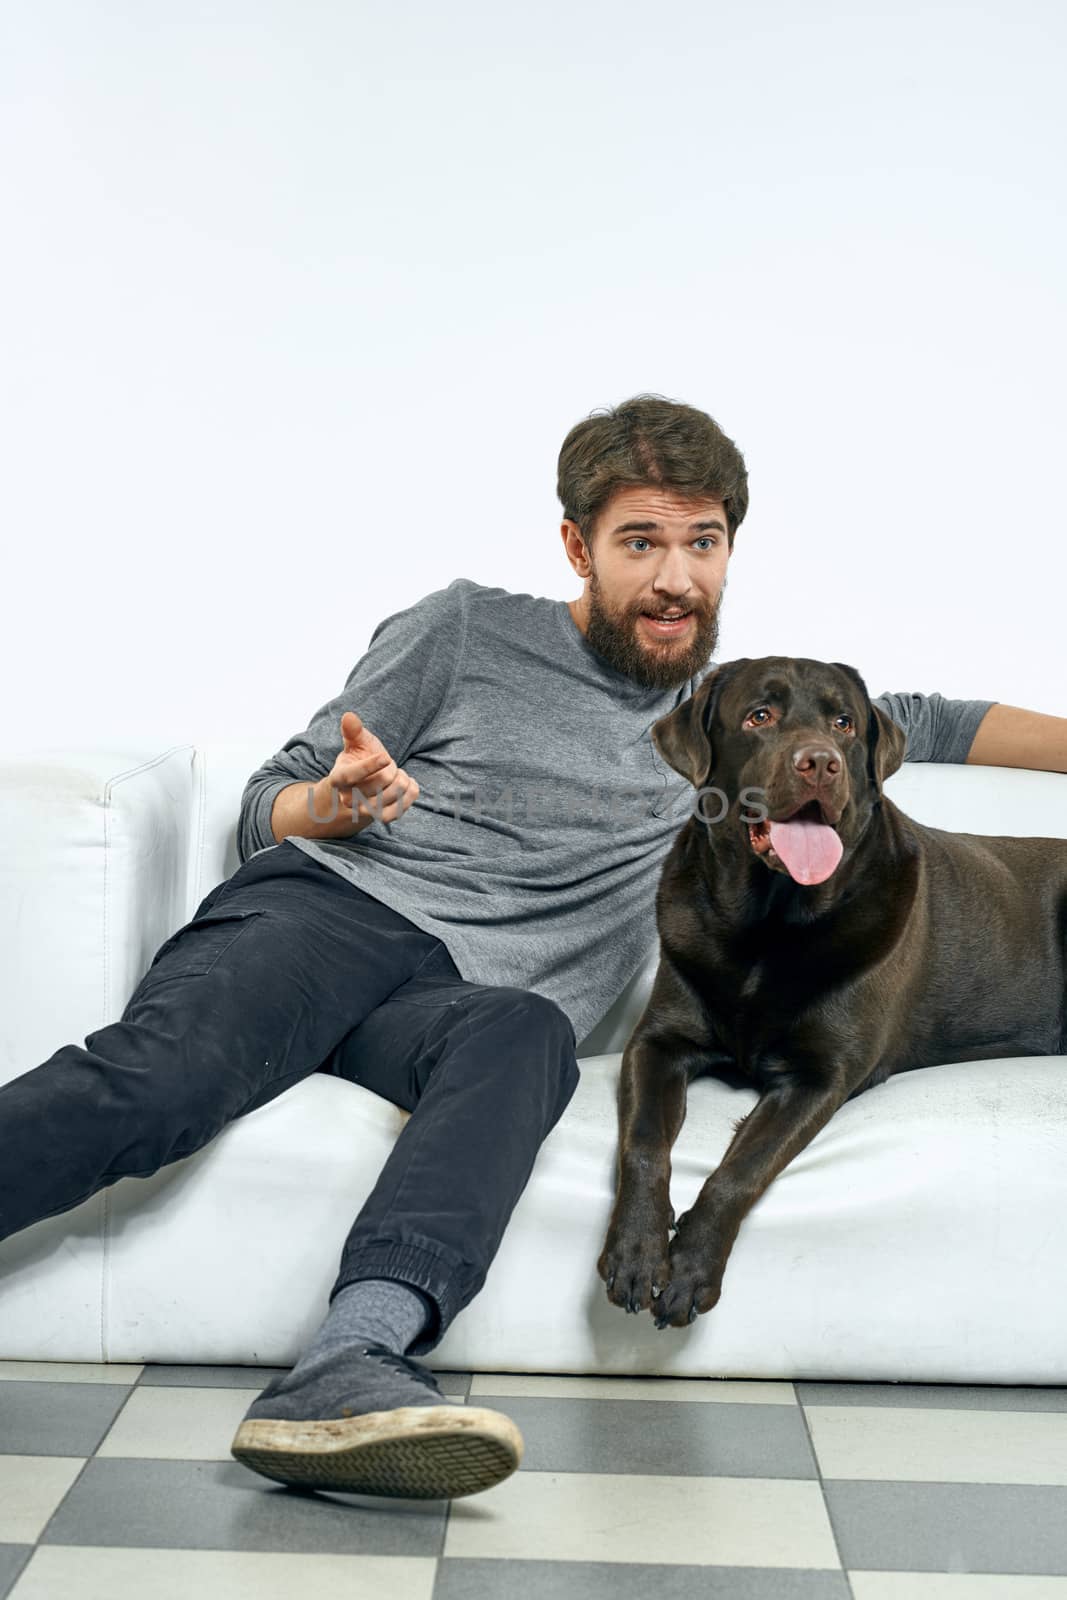 man with a black dog on a white sofa on a light background close-up cropped view pet human friend emotions fun. High quality photo